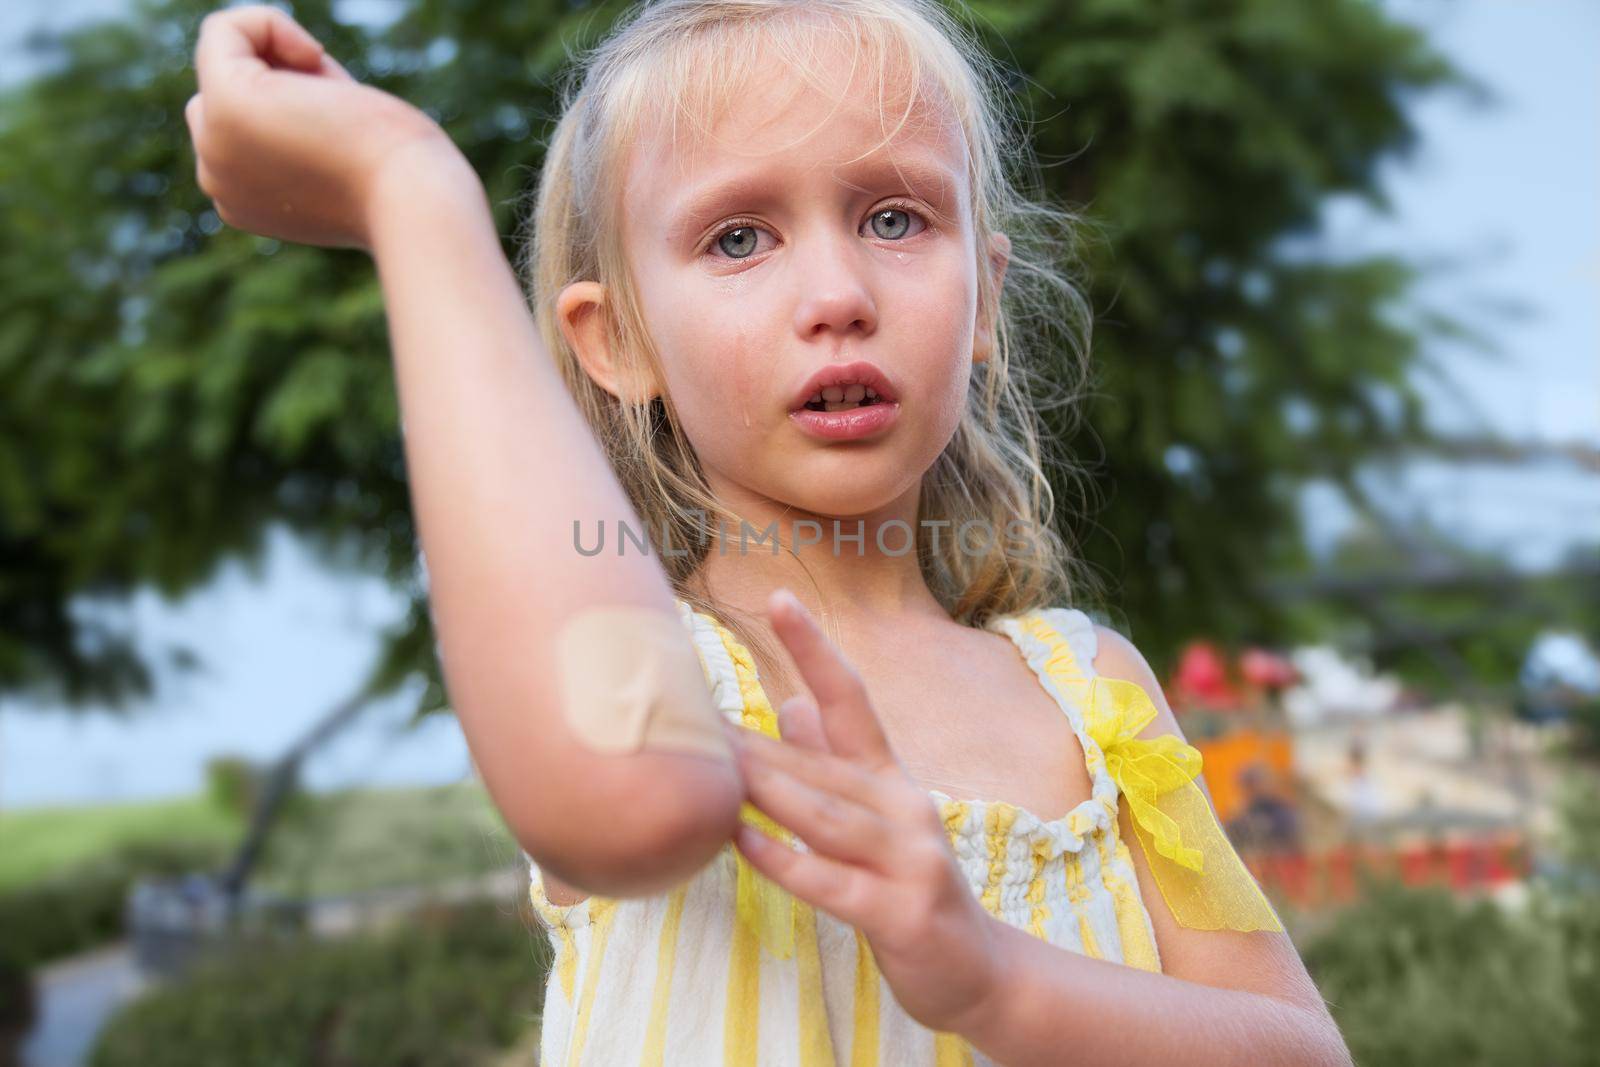 Close-up portrait of little girl. blonde, European appearance, summer day. the child fell in the park and injured his hand. Elbow injury, little girl crying. Tears on the face, pain, suffering, Summer